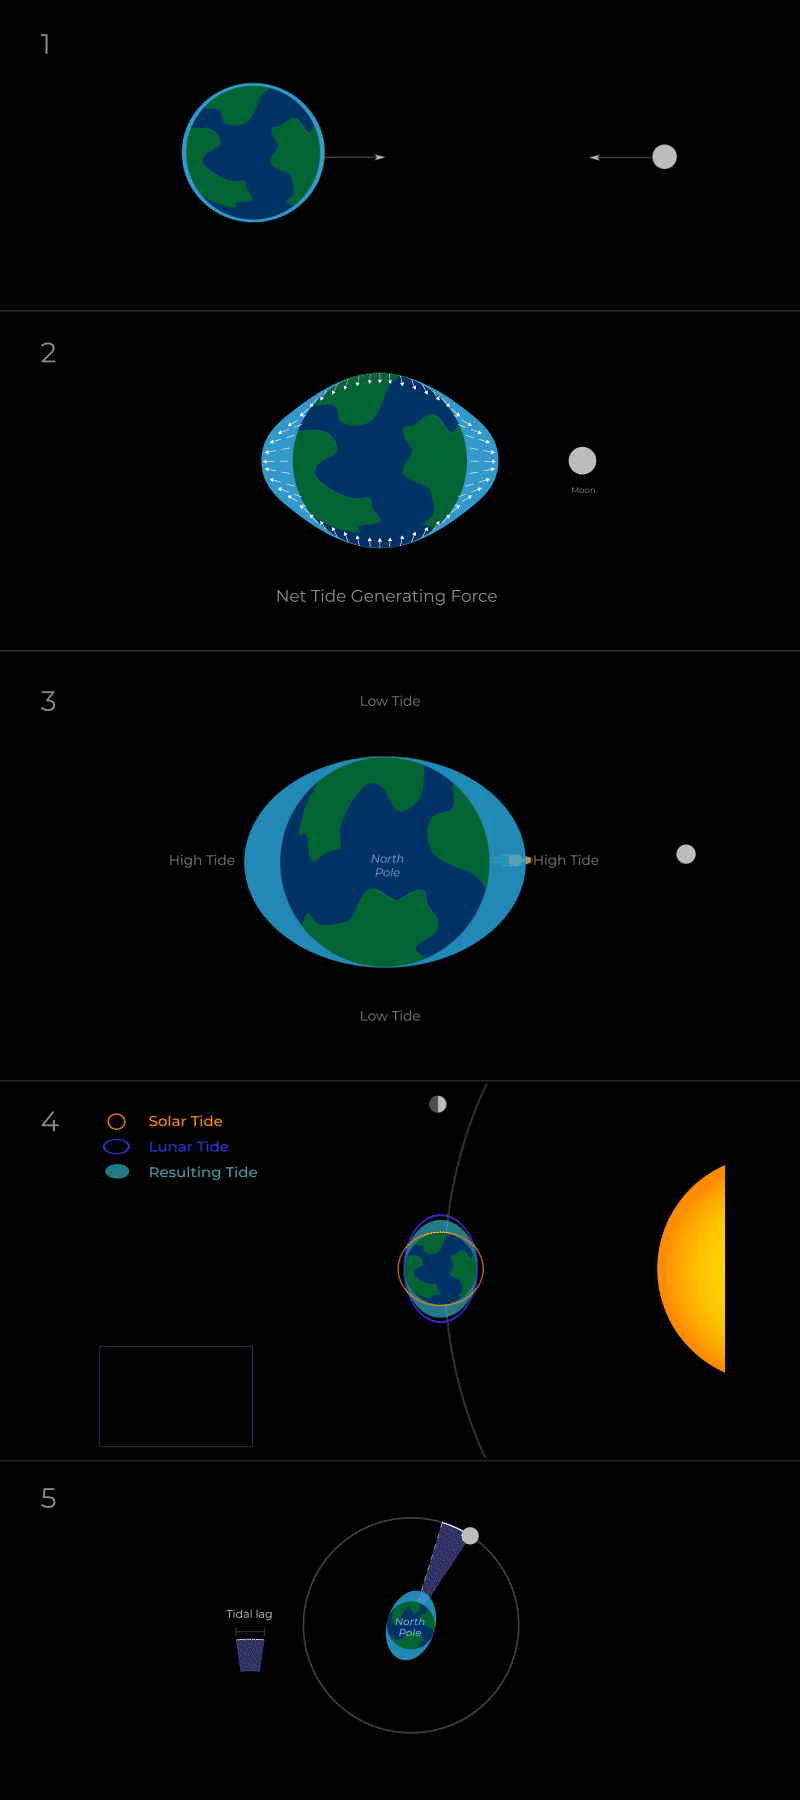 Animations of the Earth and Moon